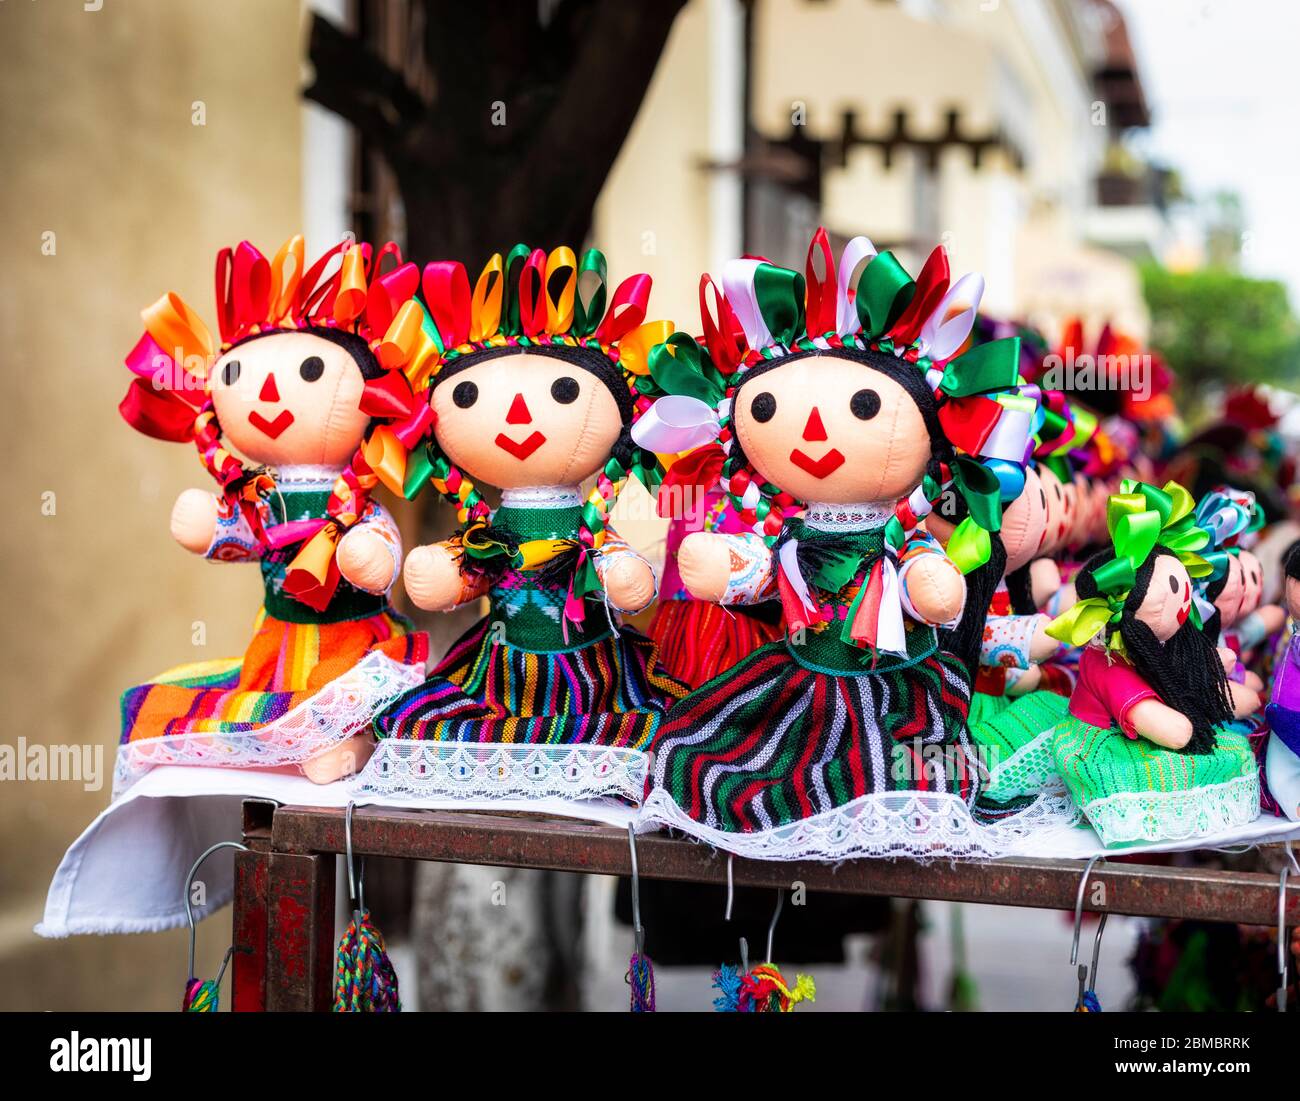 Traditionally dressed, hand-sewn dolls in street market, Tlaquepaque, Jalisco, Mexico. Stock Photo